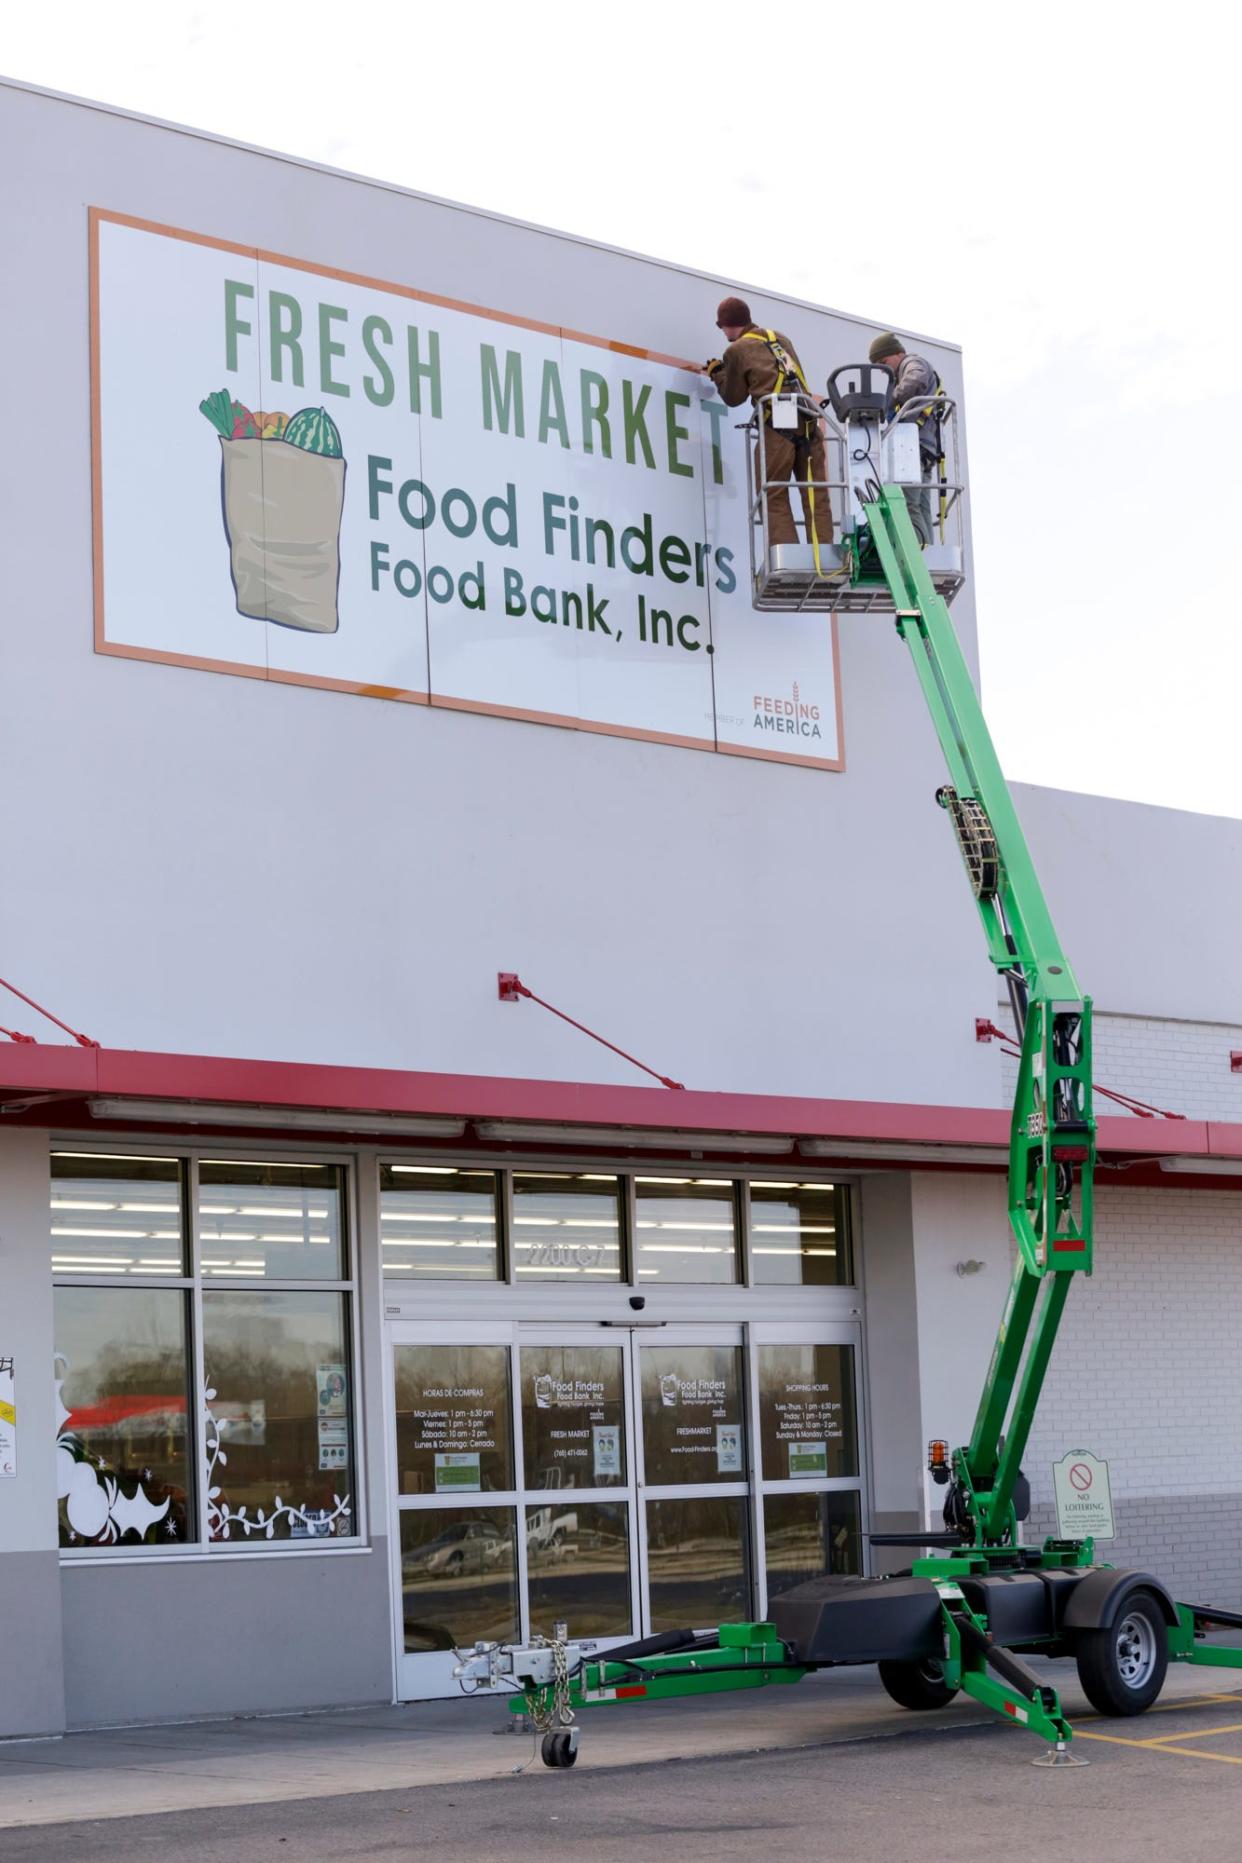 Workers install a sign for the Food Finders Food Bank Fresh Market, 2200 Elmwood Ave., Thursday, Dec. 3, 2020 in Lafayette.